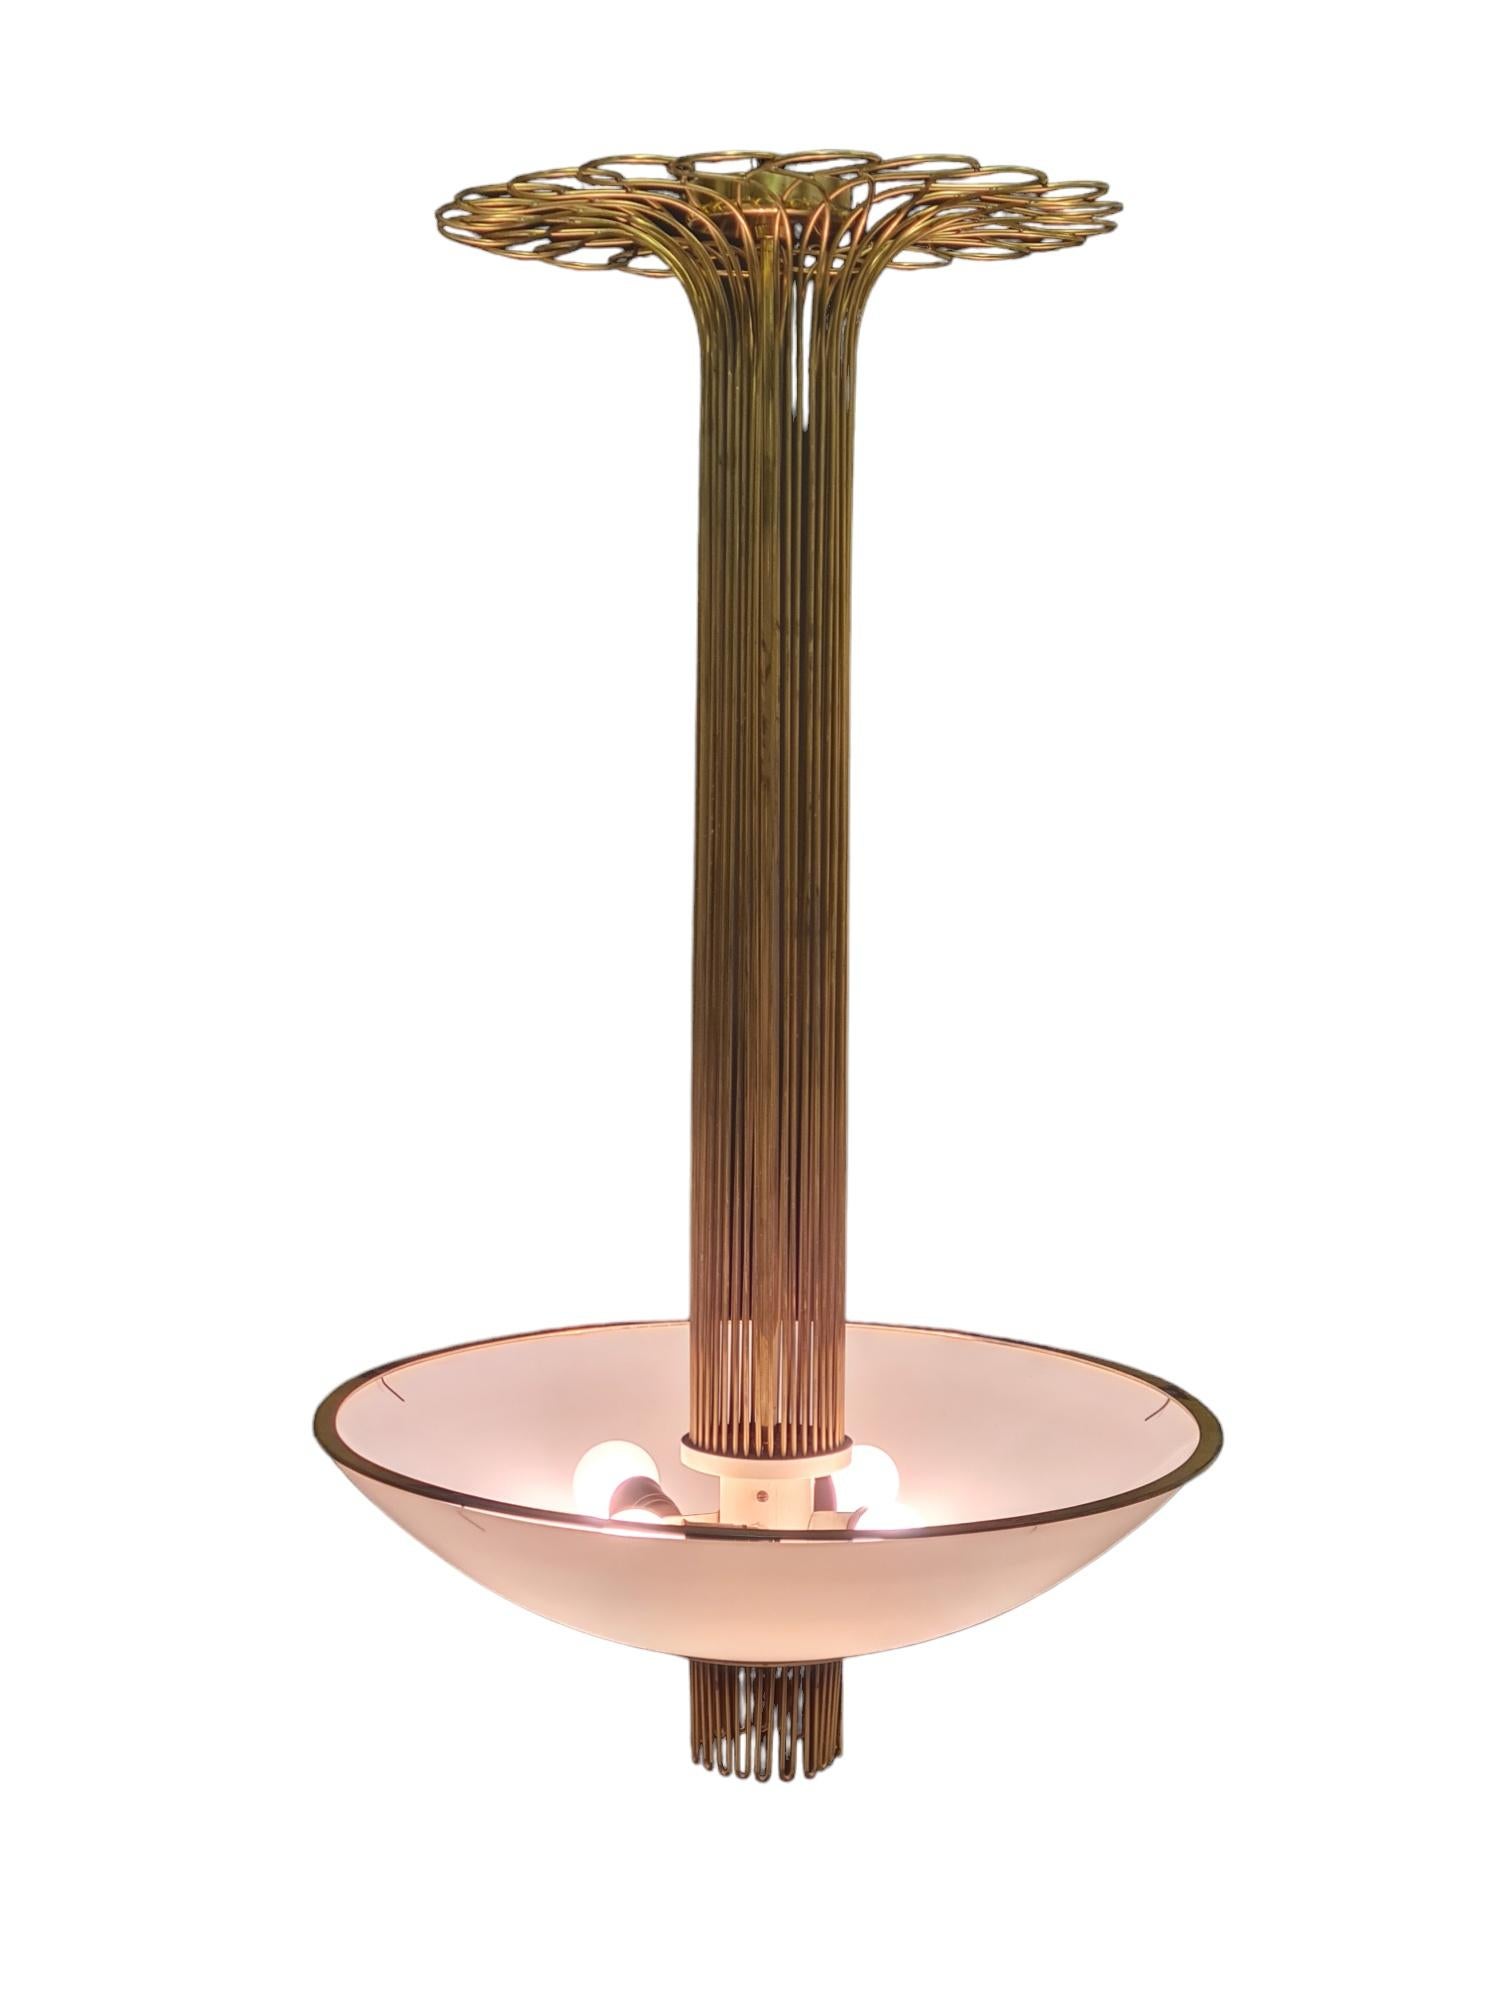 Finnish Paavo Tynell Ceiling Lamp In Brass And Glass For Sale